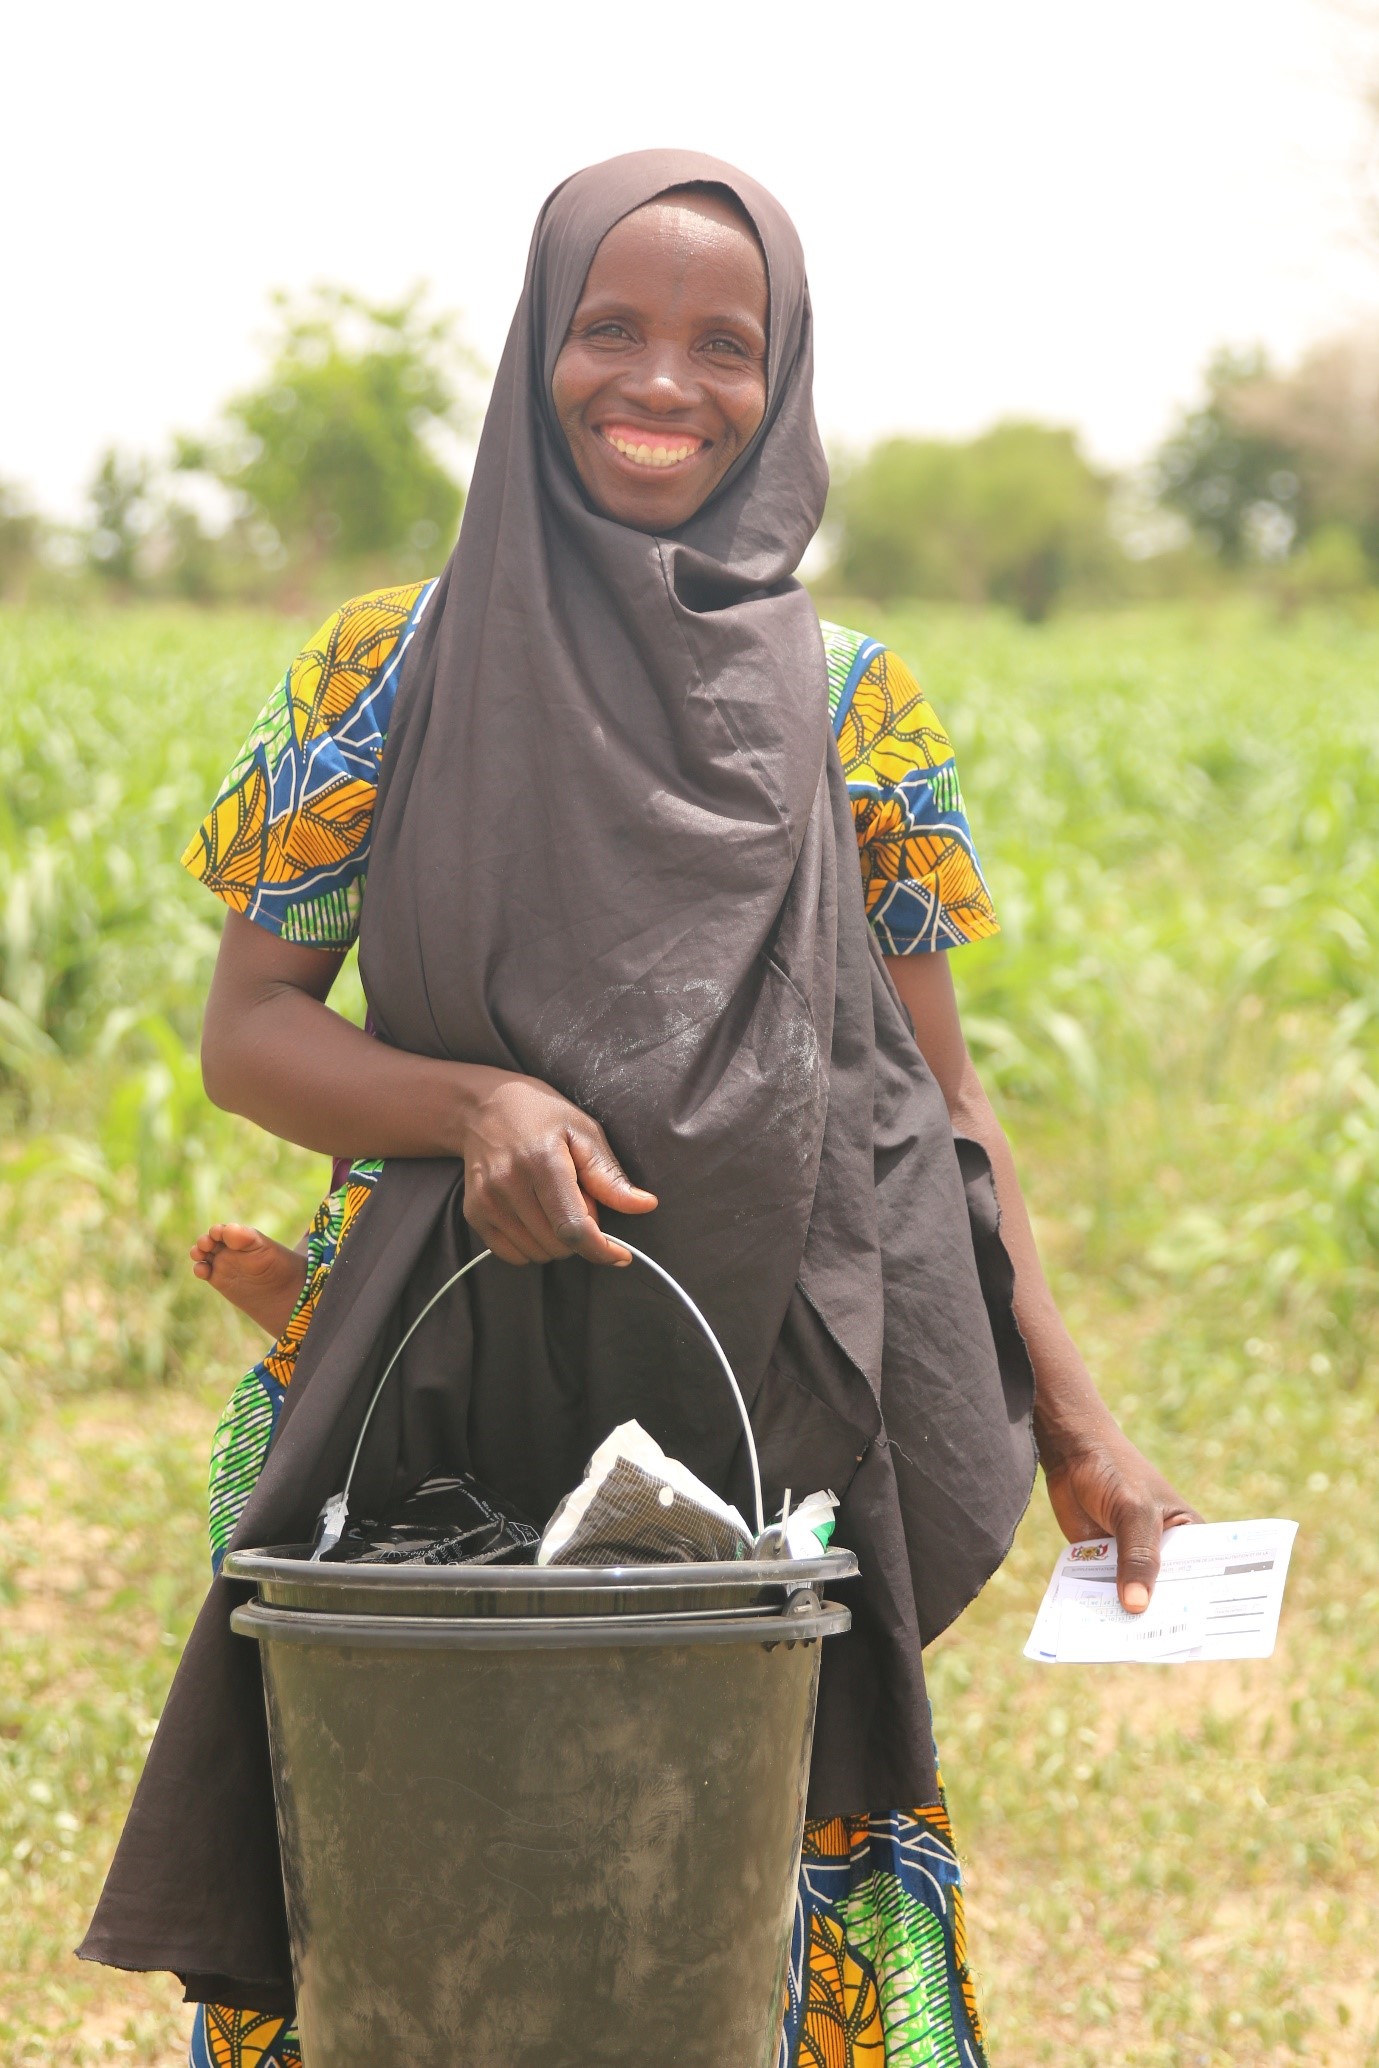 "Since I left my village, my daily life has not been easy at all, and besides the food problem, I have not had a shower for almost a week, so I'm very lucky to have received this kit because it's not everyone who had this chance in the village ", said Fatchima Ibrahim